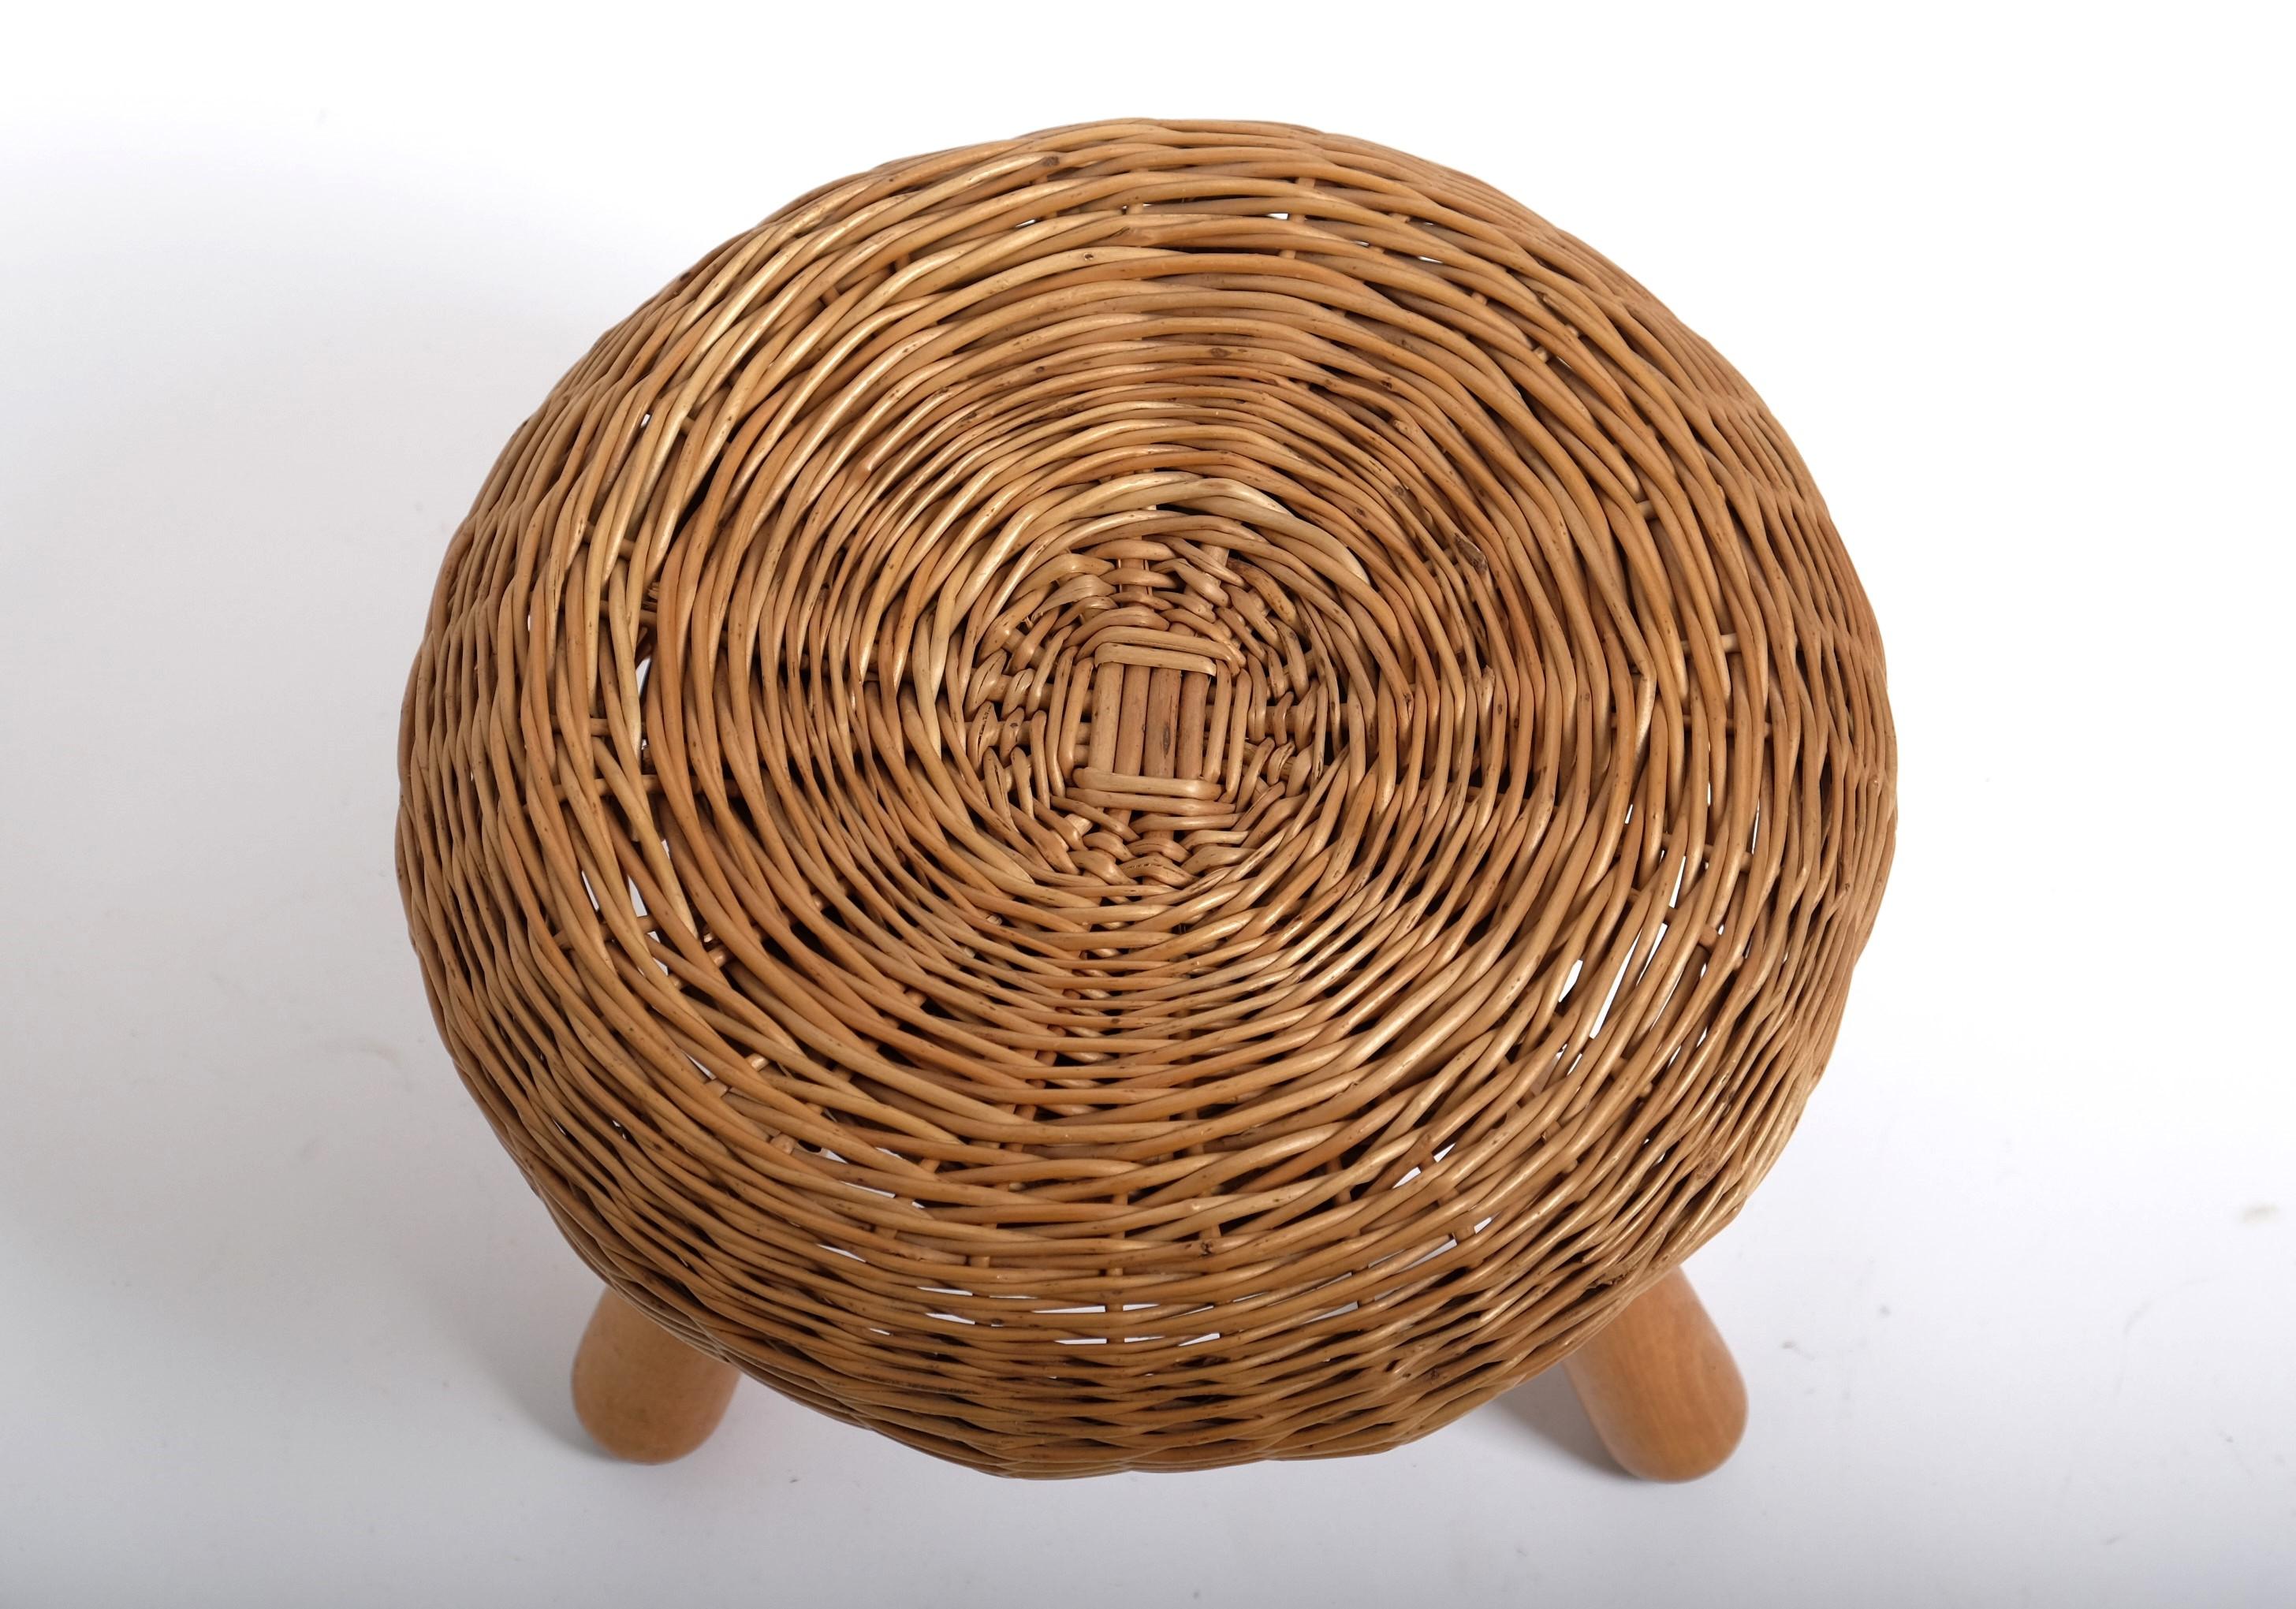 Tony Paul 'Attributed' Stool Wicker Wood, United States 1950s For Sale 4